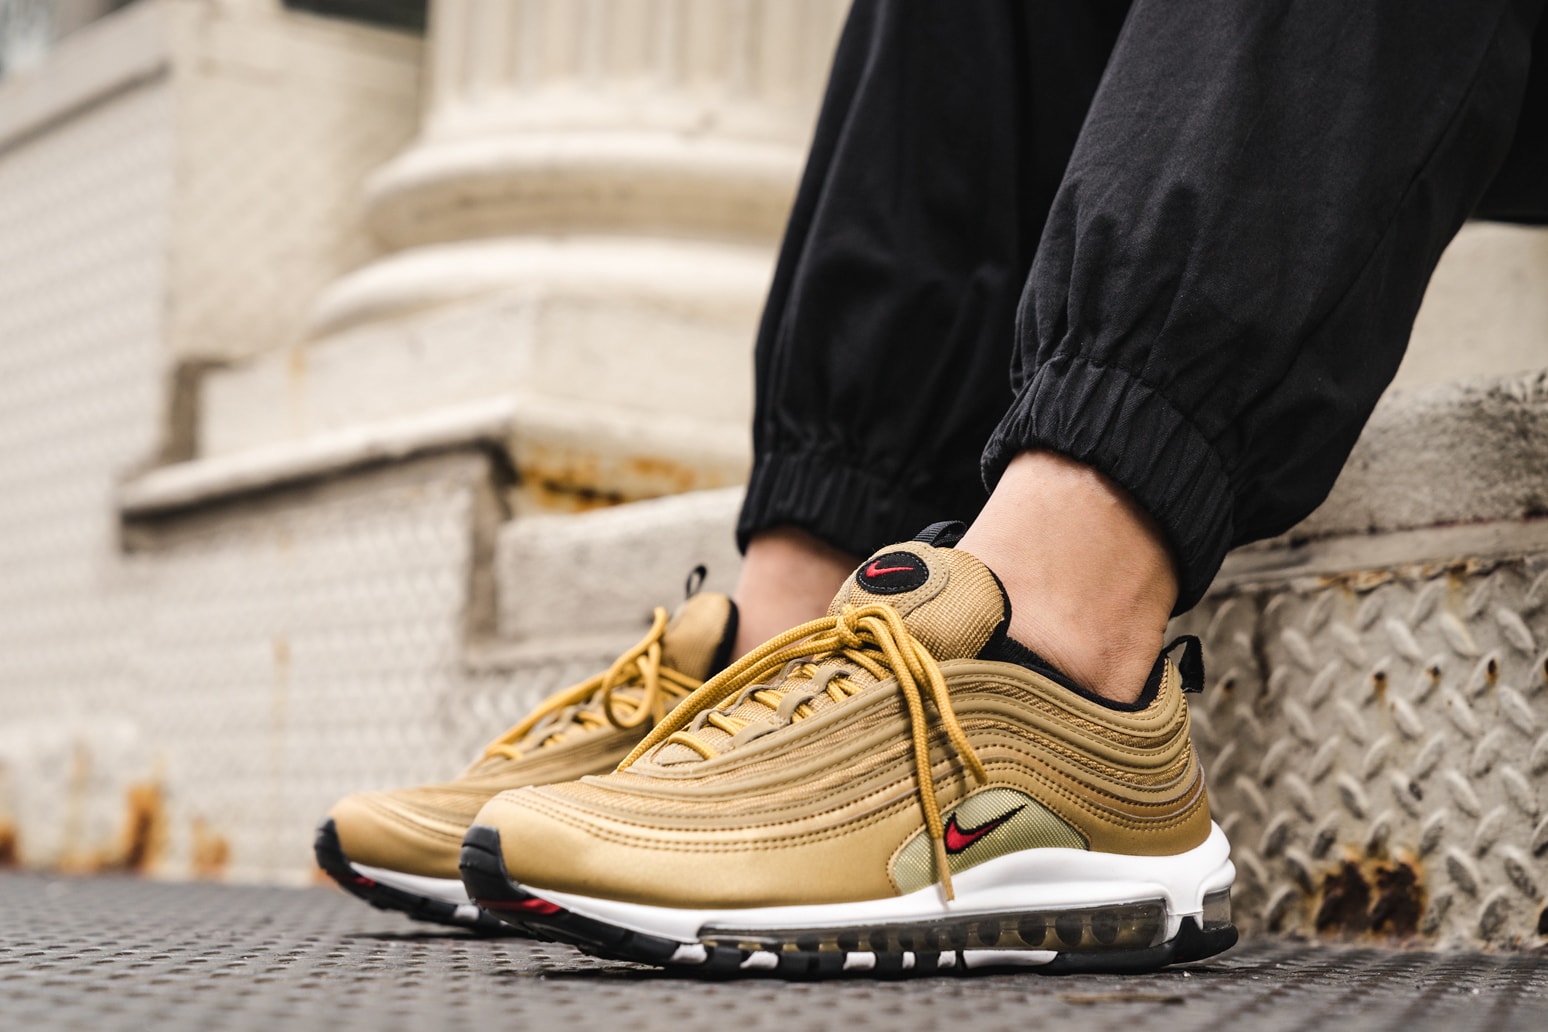 Undefeated x Nike Air Max 97 OG Sail and White YouTube